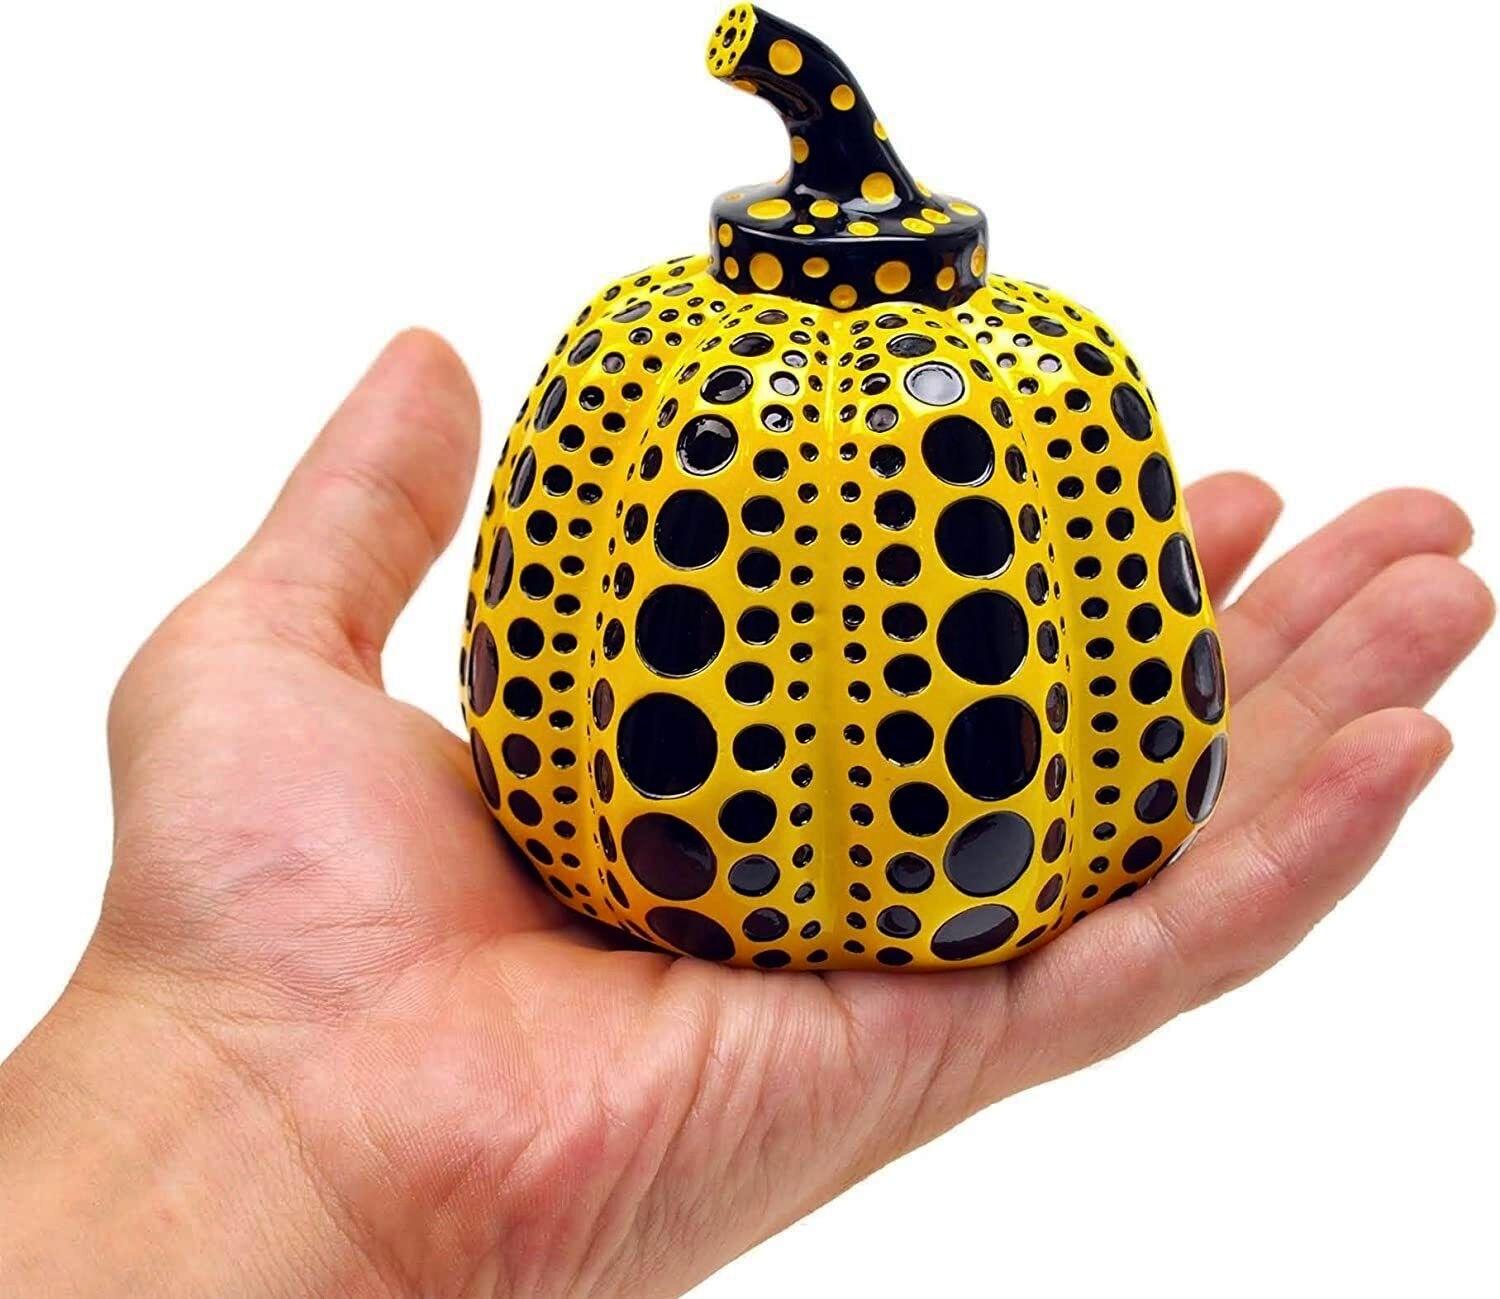 Pumpkins (Yellow & Black & Red & White) Two Painted Sculptures Yayoi Kusama For Sale 2